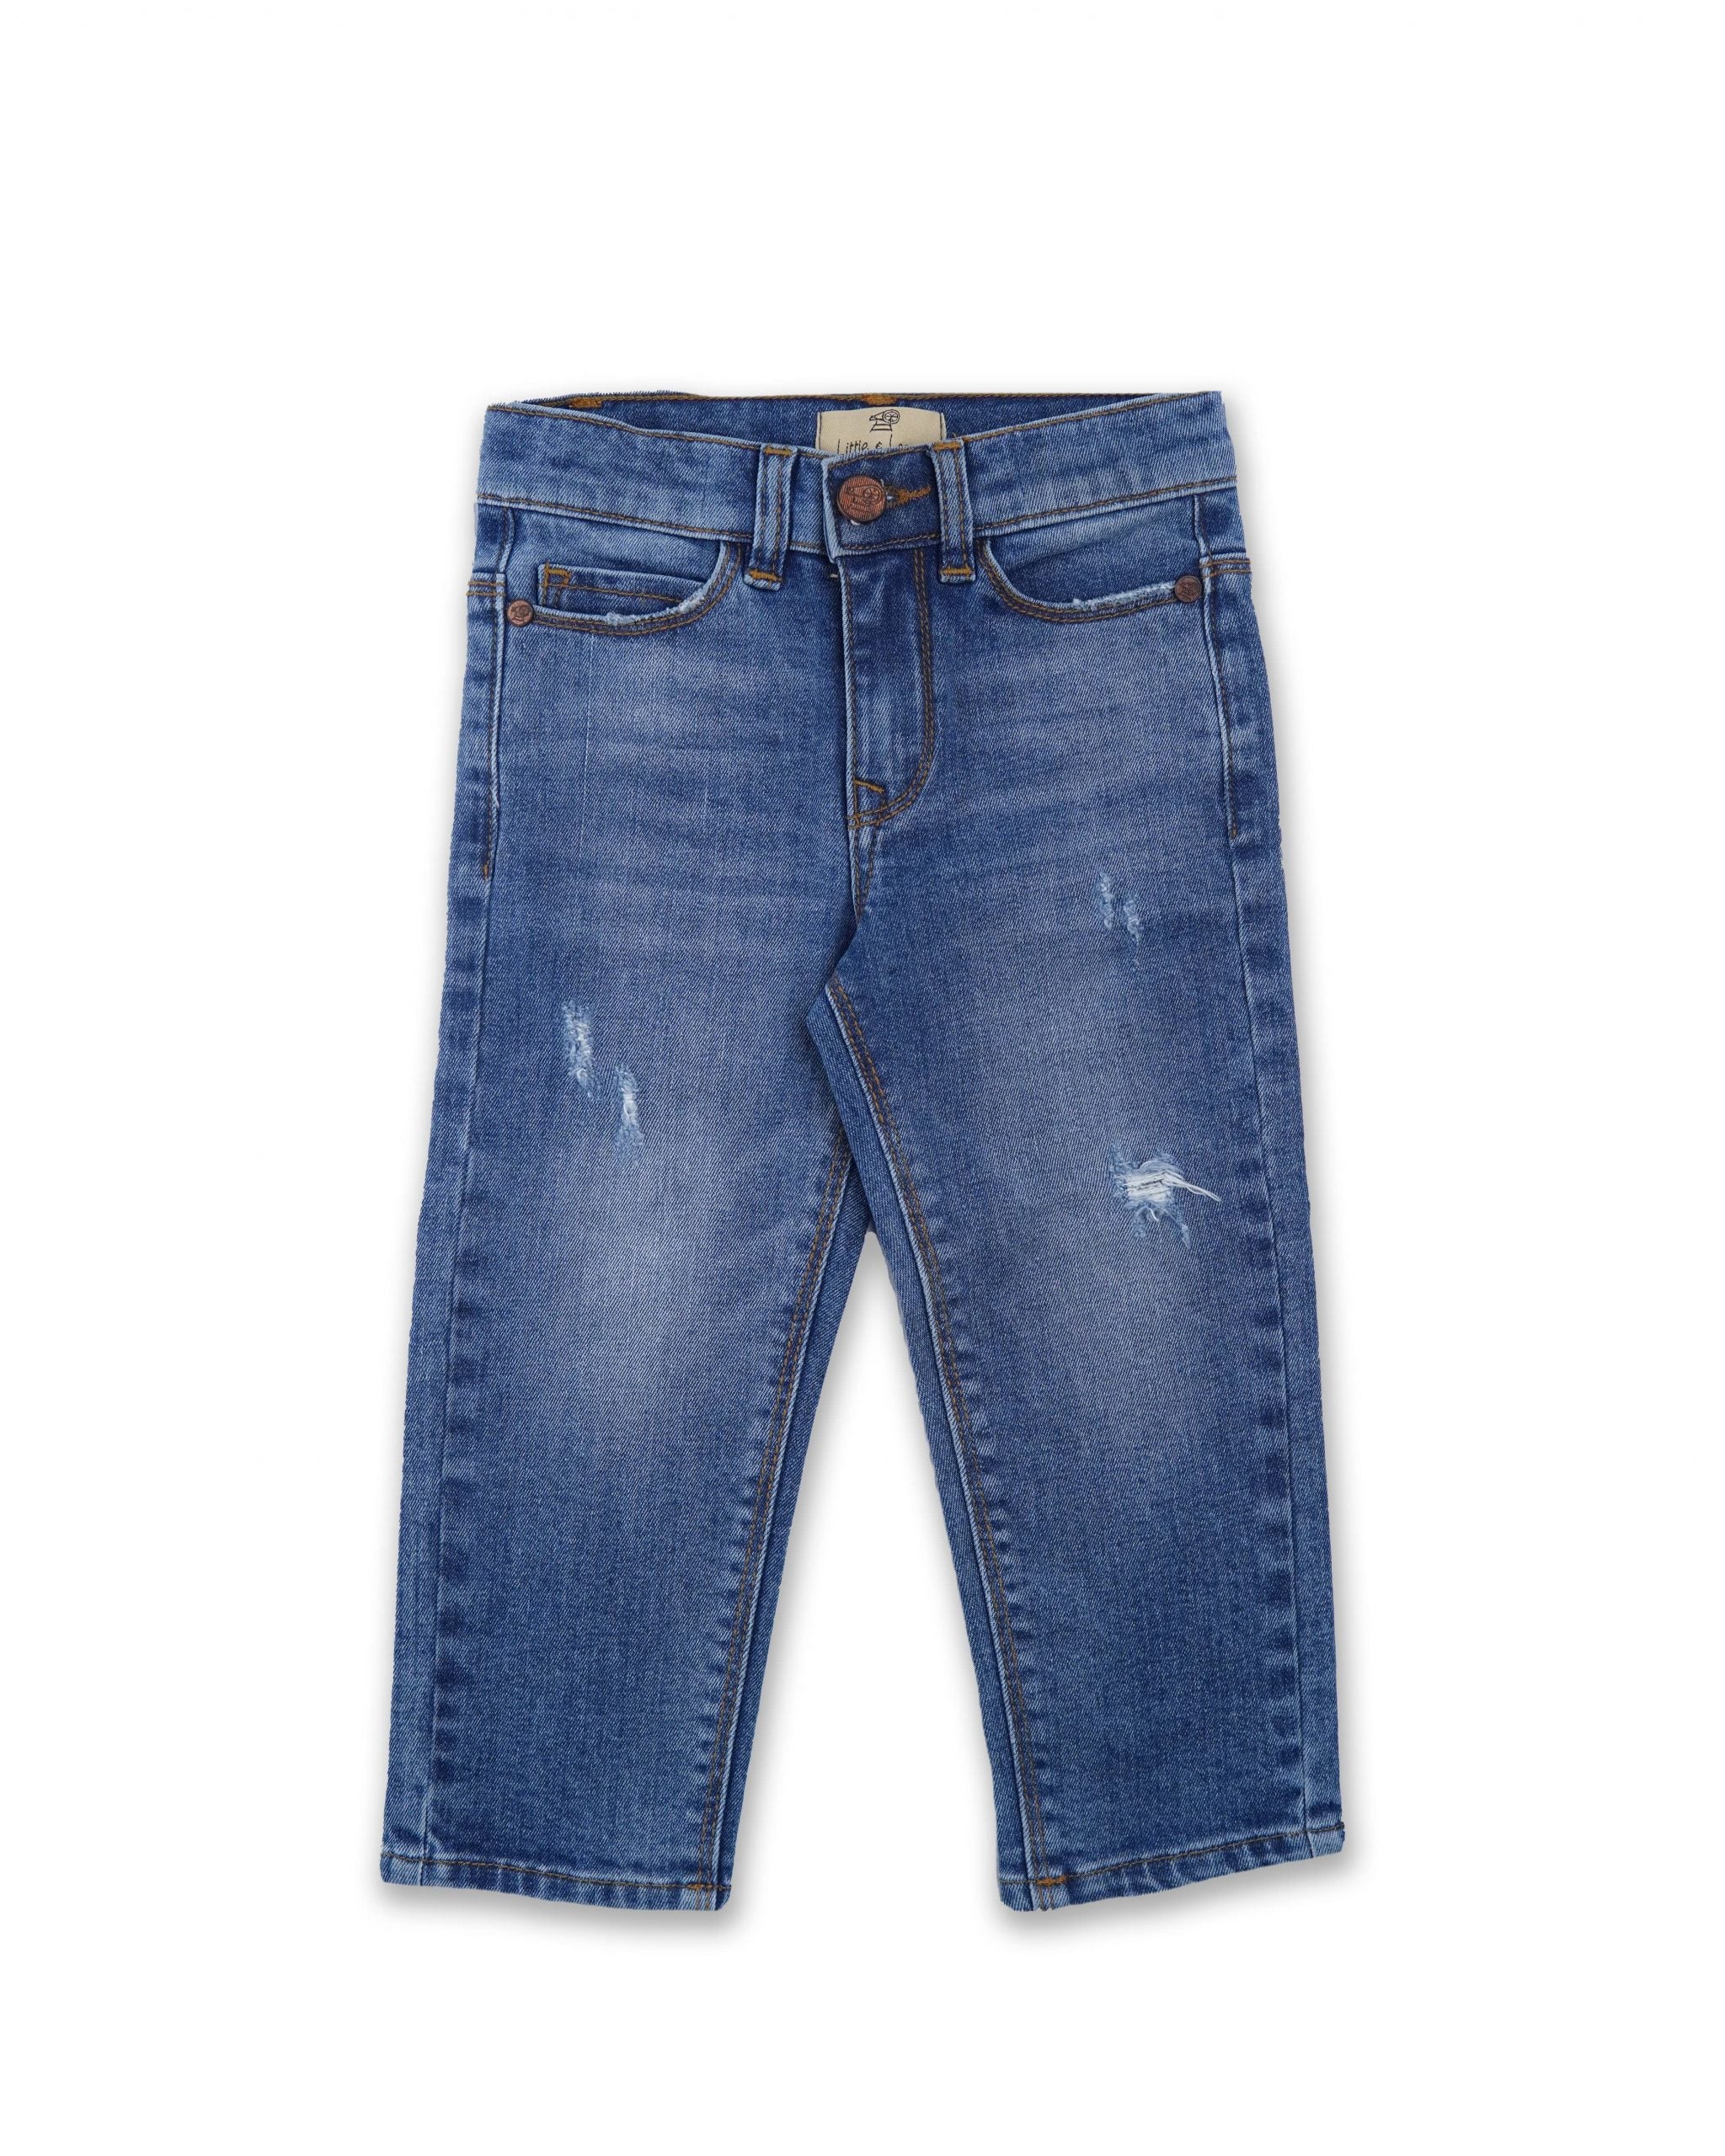 Authentic sky jeans